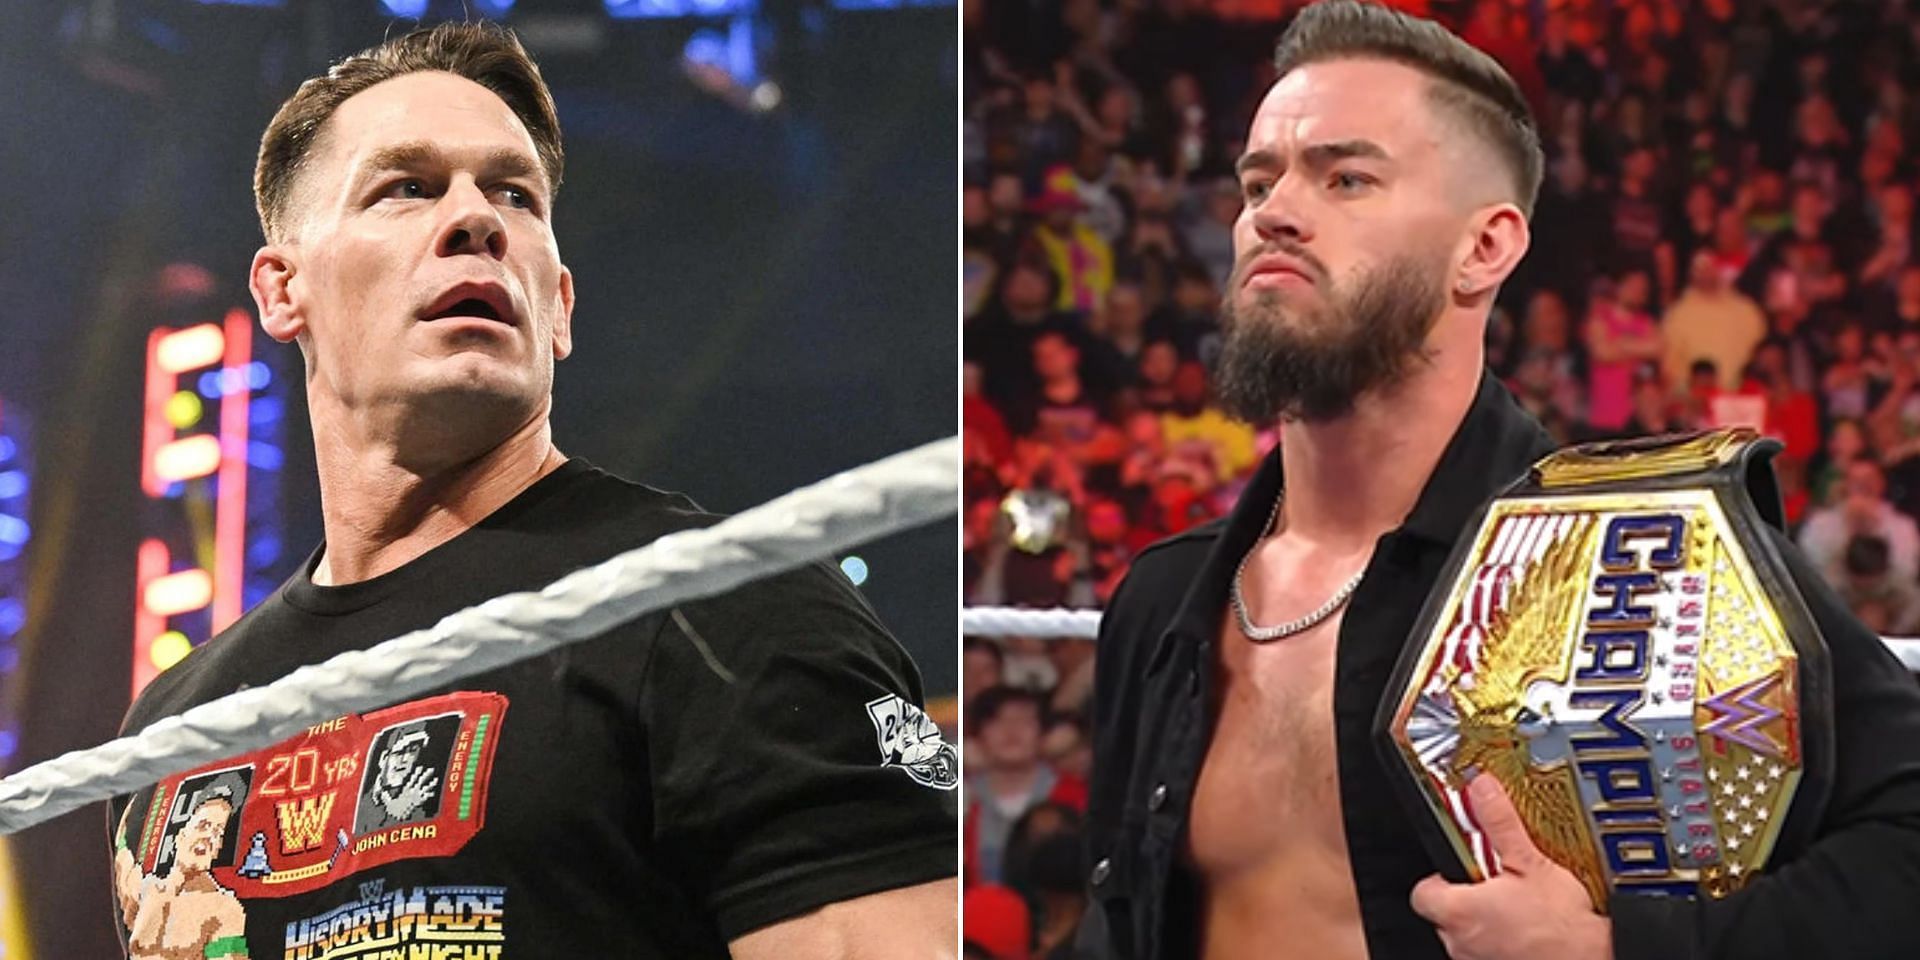 John Cena and Austin Theory are set to collide at WrestleMania